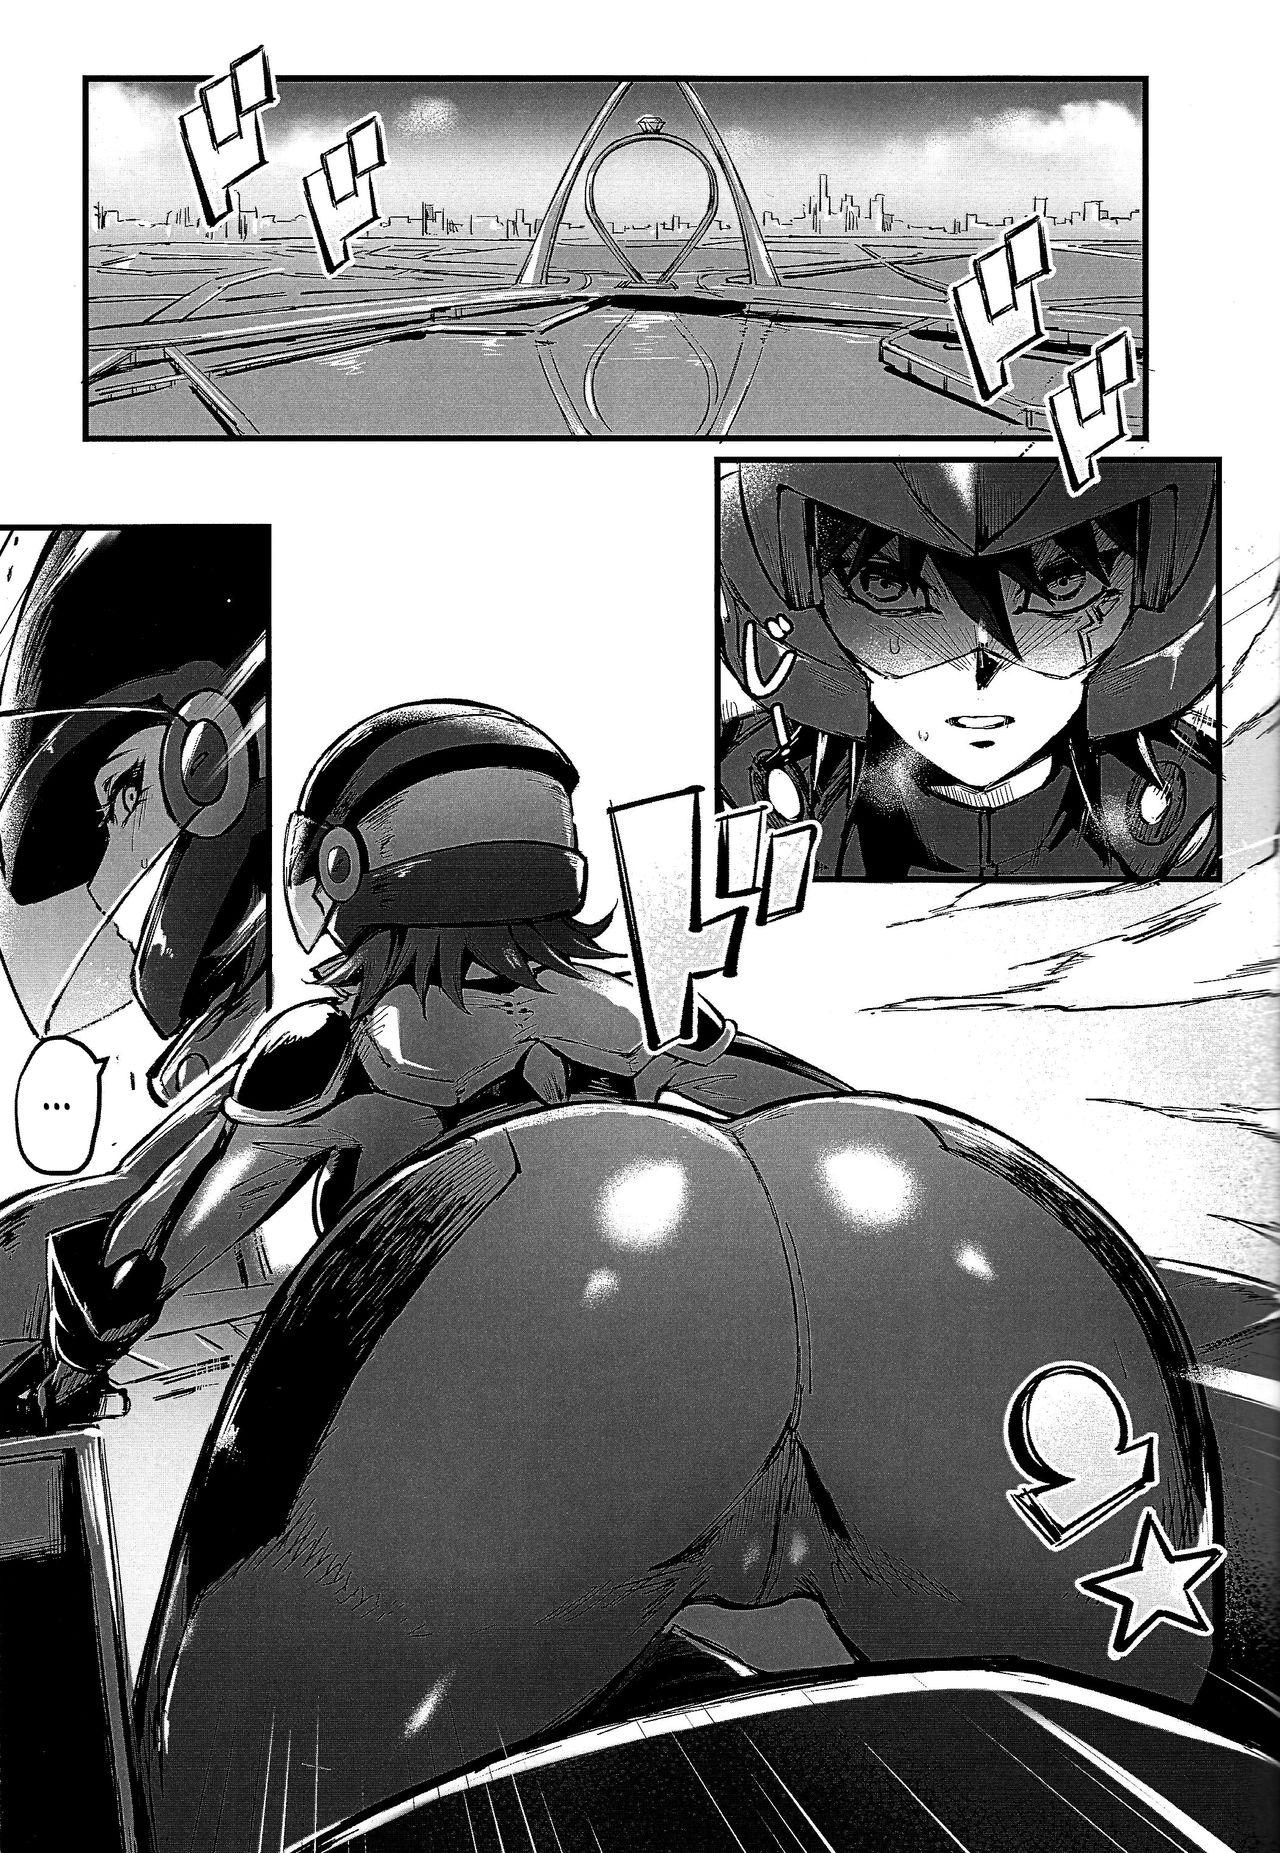 Sloppy Blow Job MASK of D. - Yu-gi-oh 5ds Chicks - Page 2